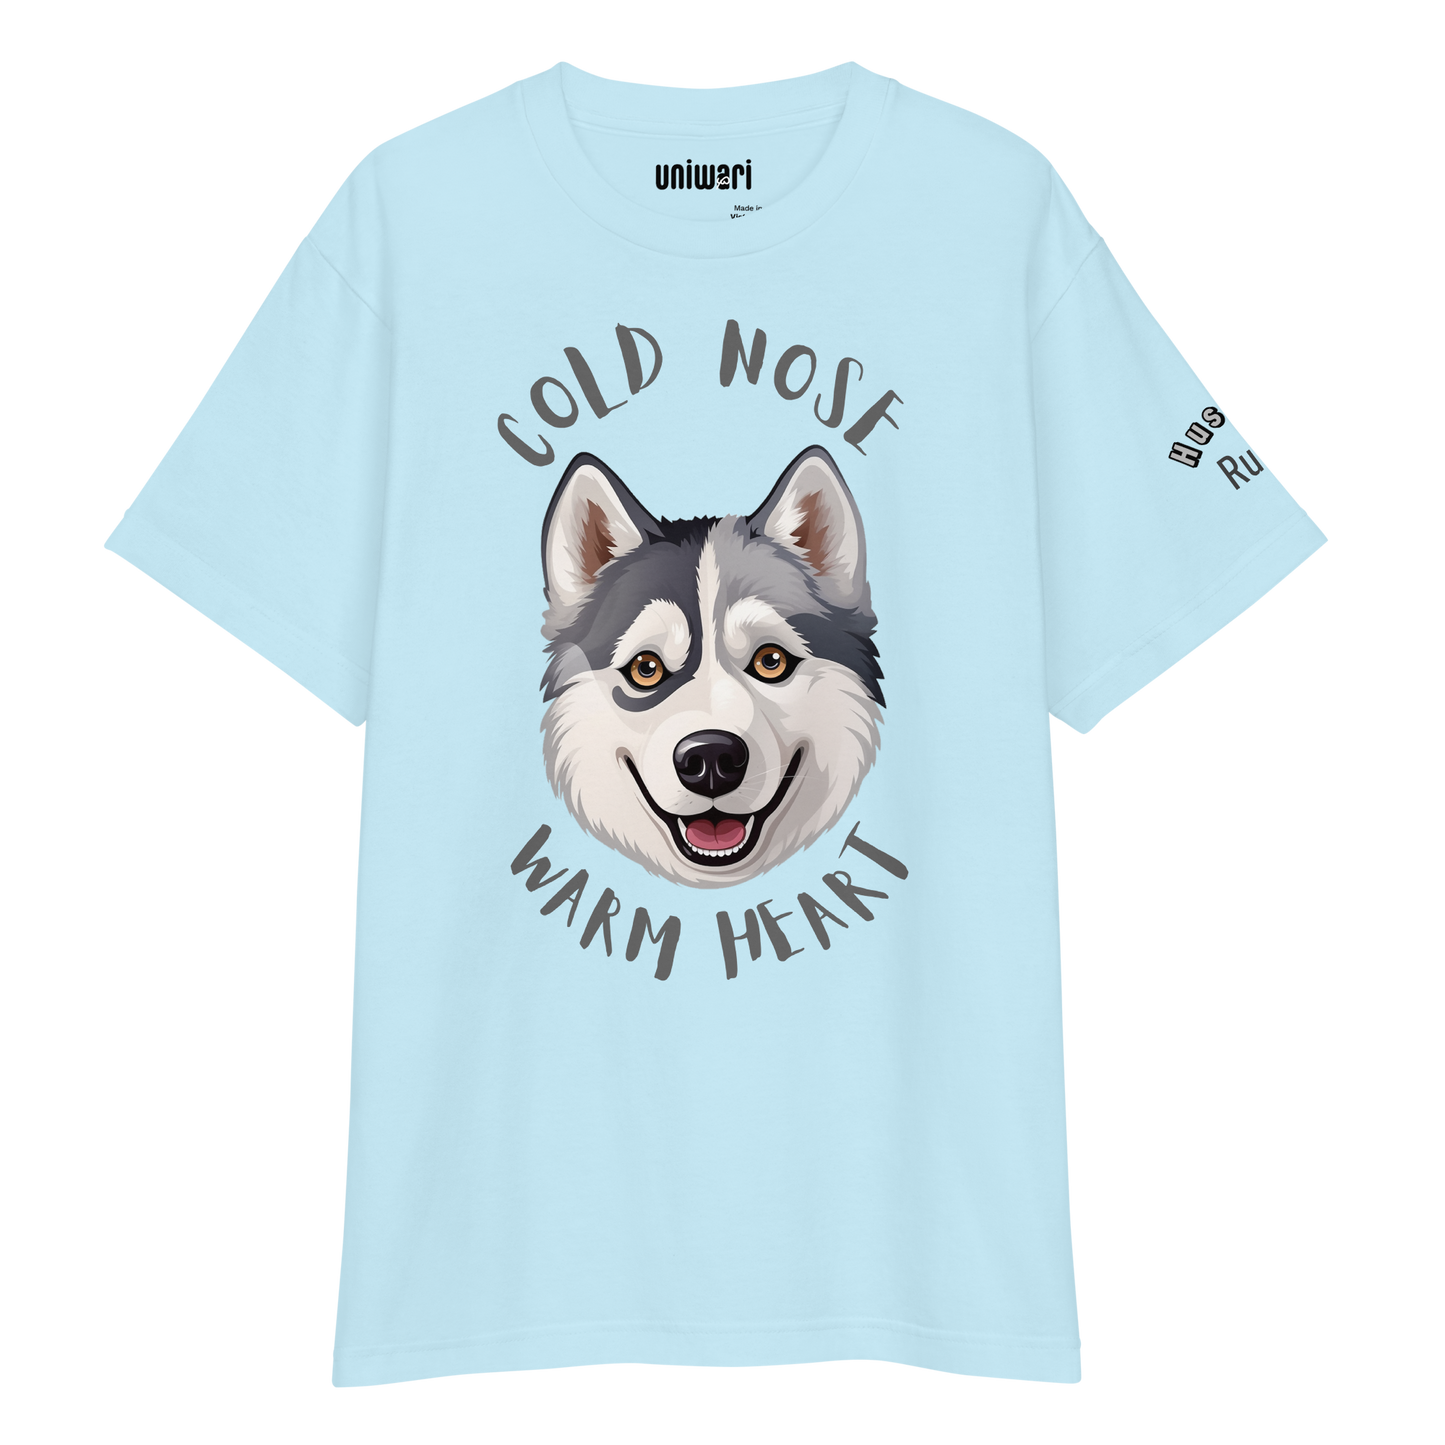 Blue High Quality Tee - Front Design with a stamp of a Husky and the phrase "cold nose warm heart" - Left Shoulder with phrase "Husky Rules"